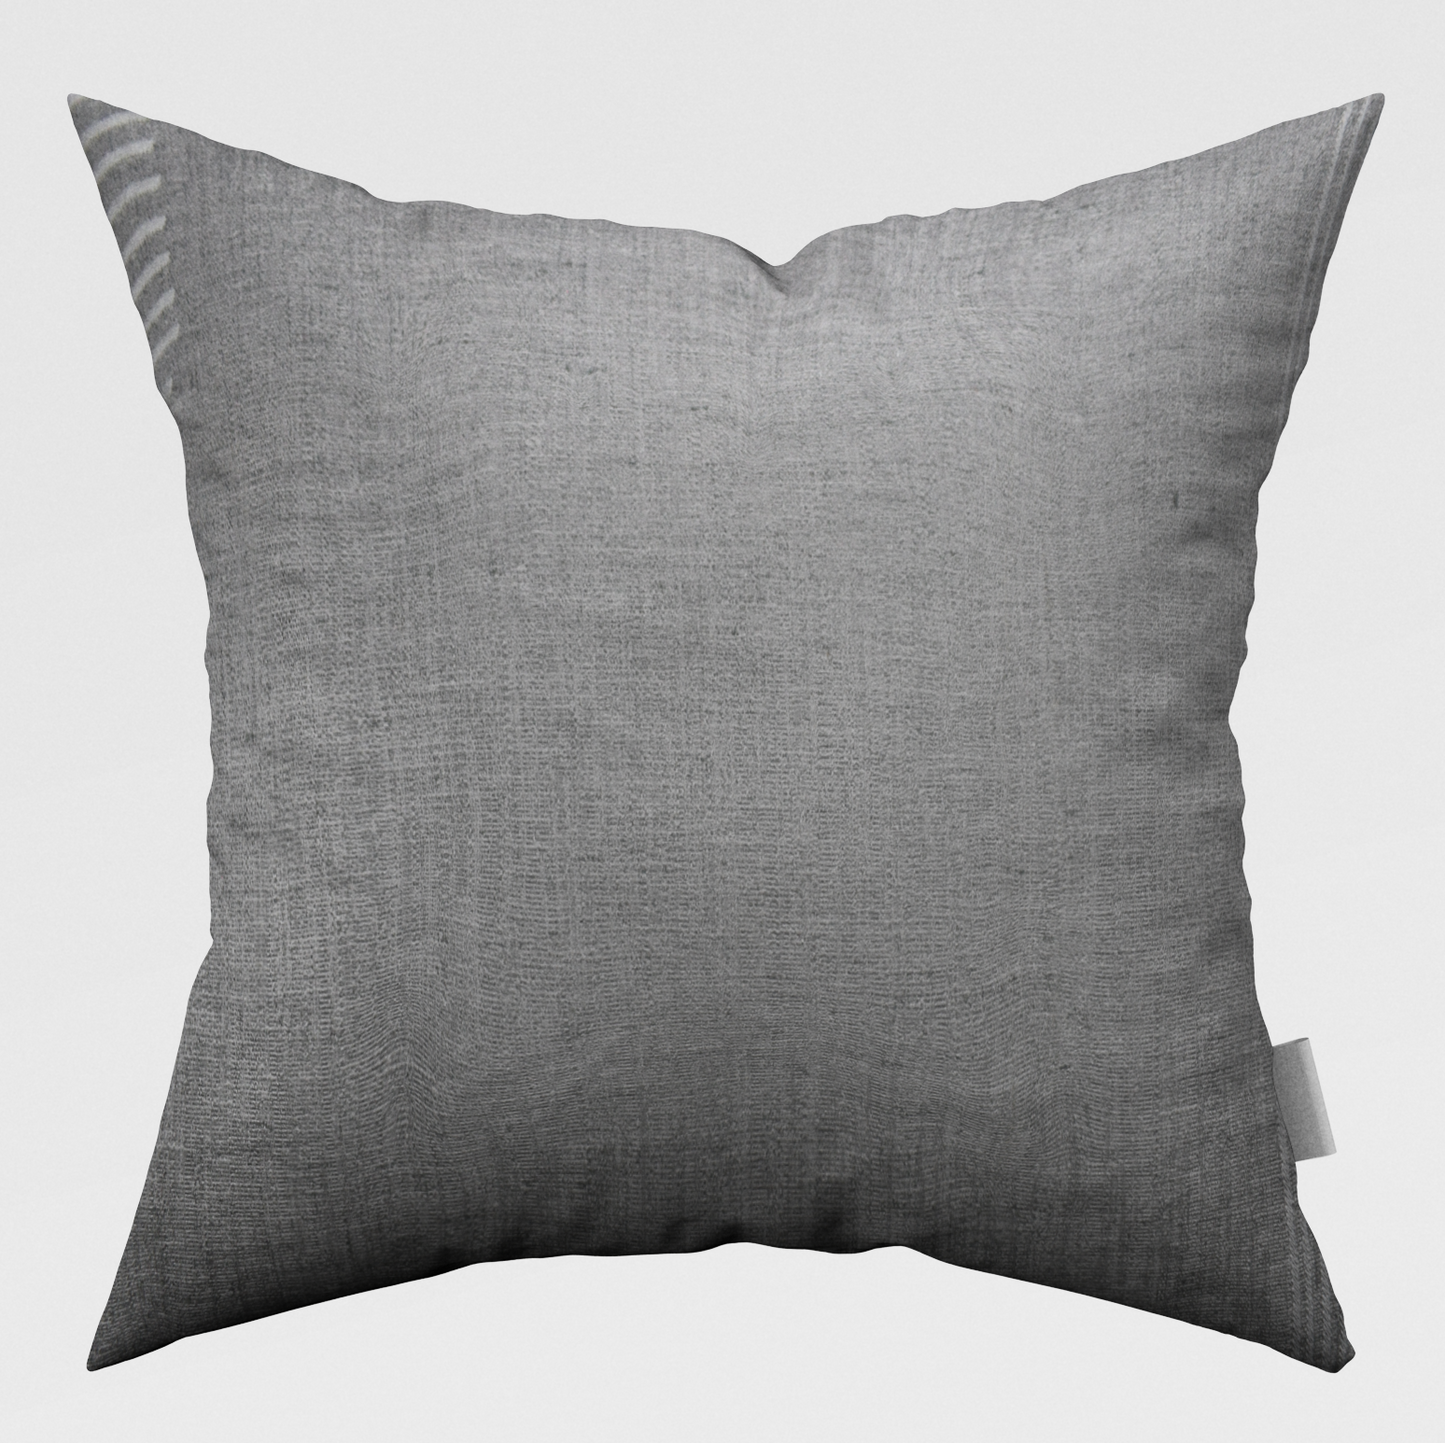 Grey Flower Pattern Pillow Cover